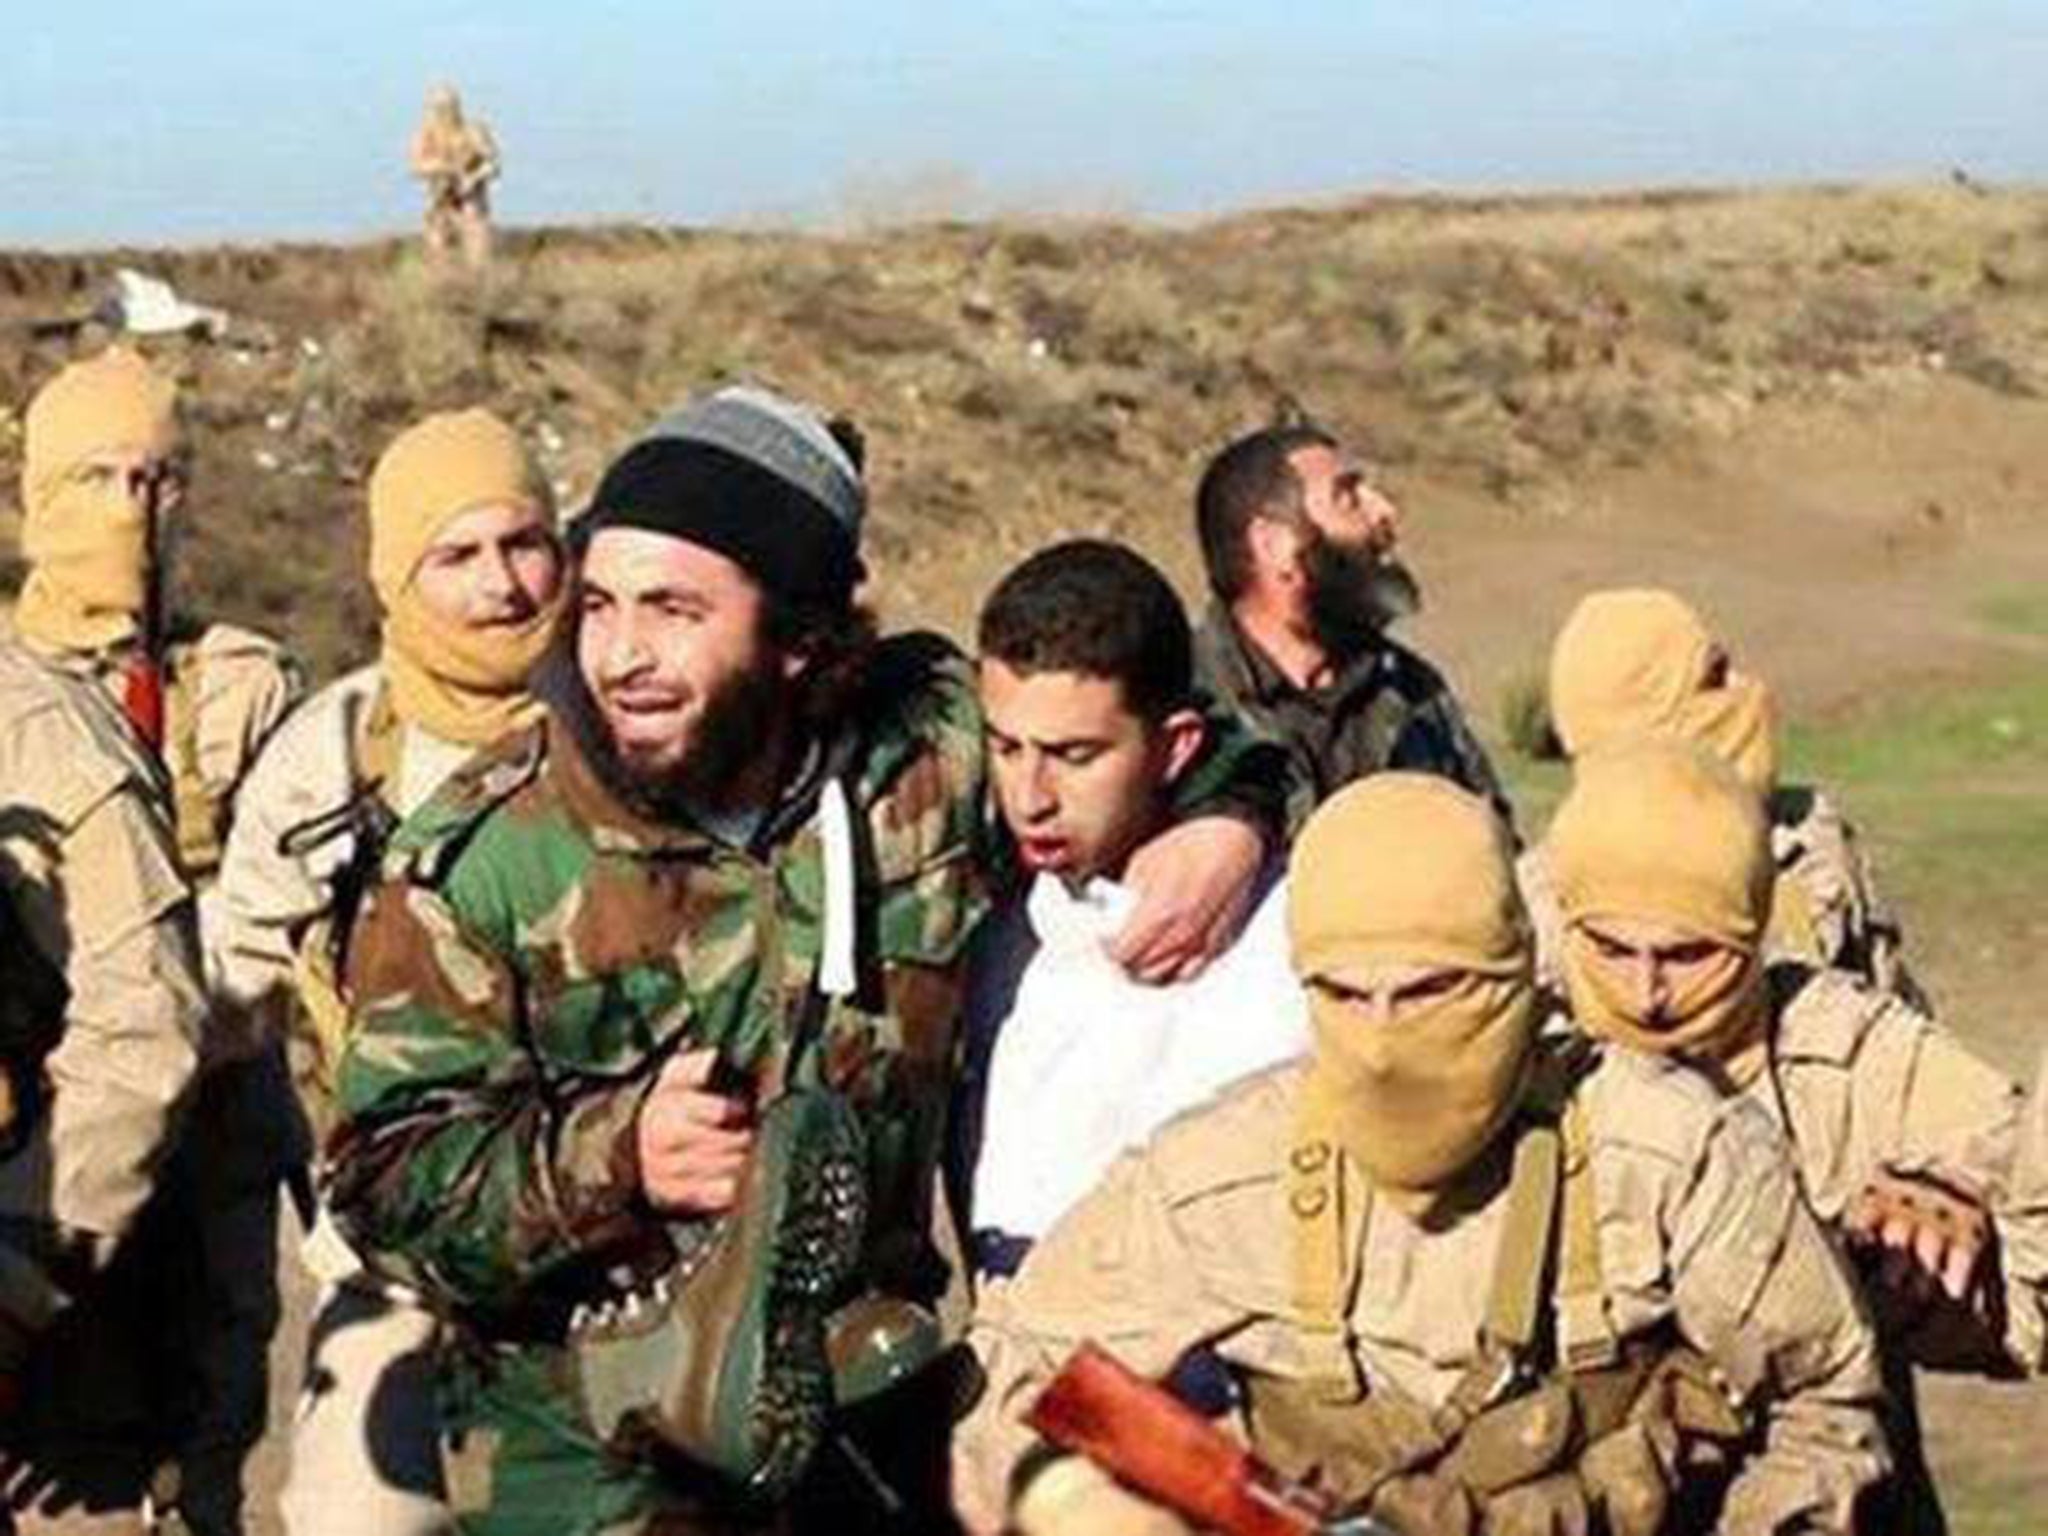 Downed pilot Muath al-Kaseasbeh is thought to be held nearby to Raqqa